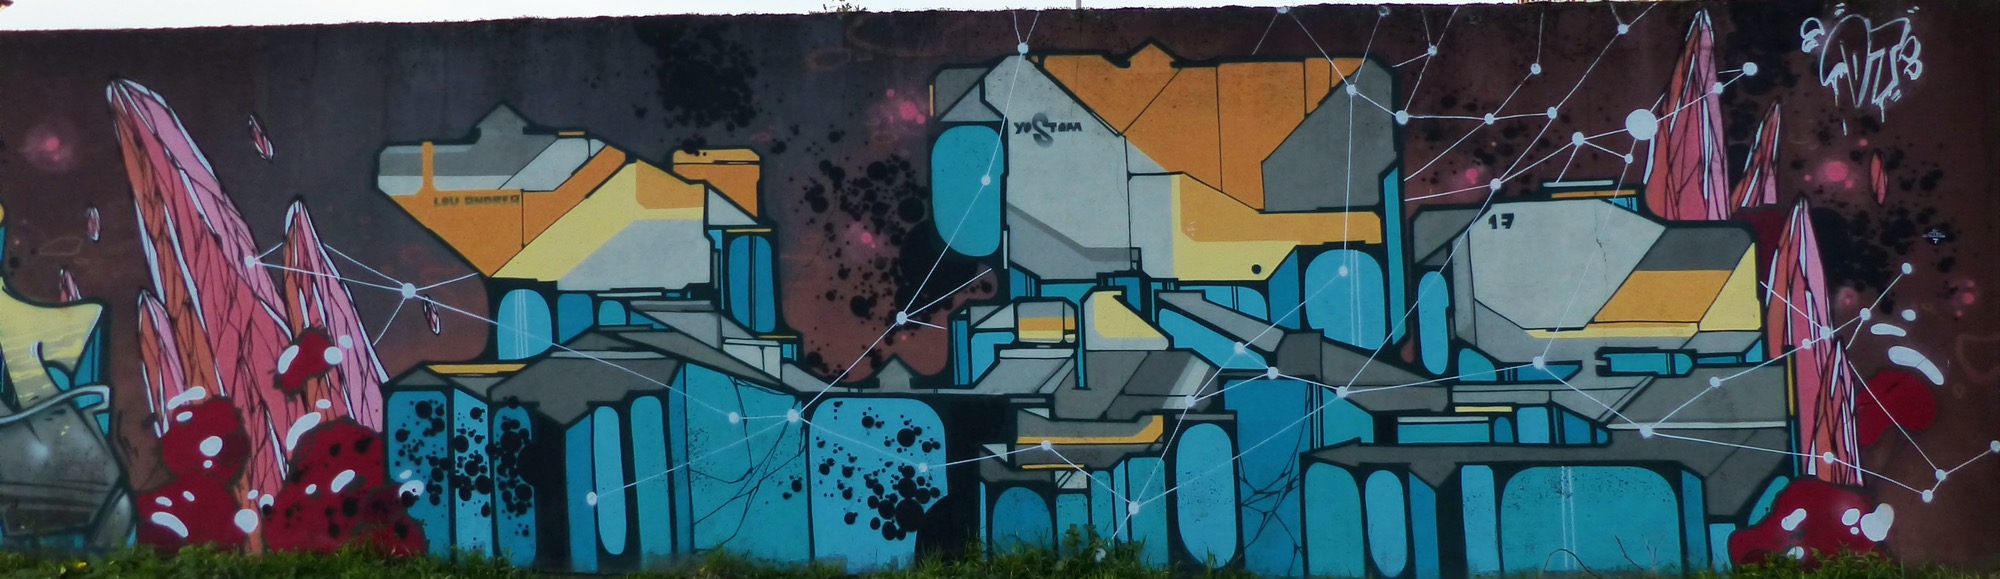 Graffiti 19  captured by Rabot in Nantes France